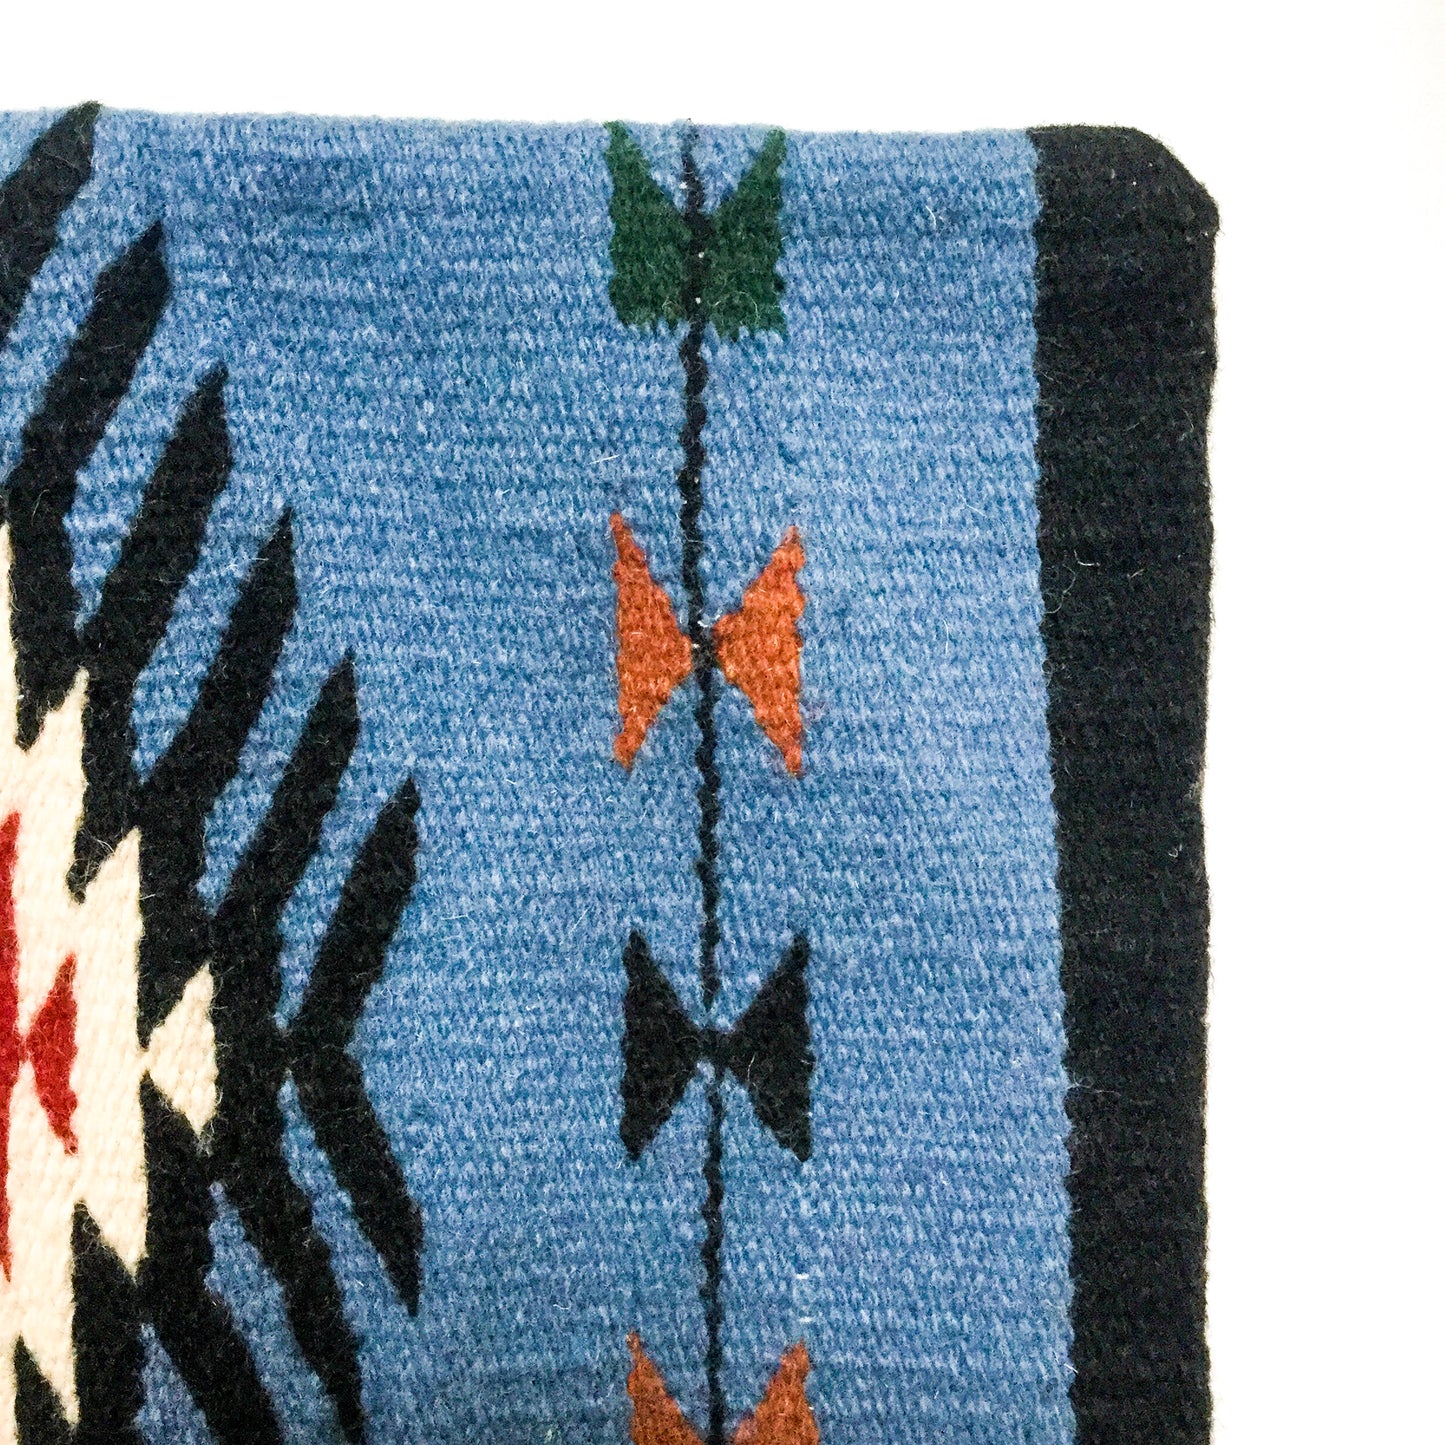 Southwestern Woven Wool Pillow Cover - blue tones